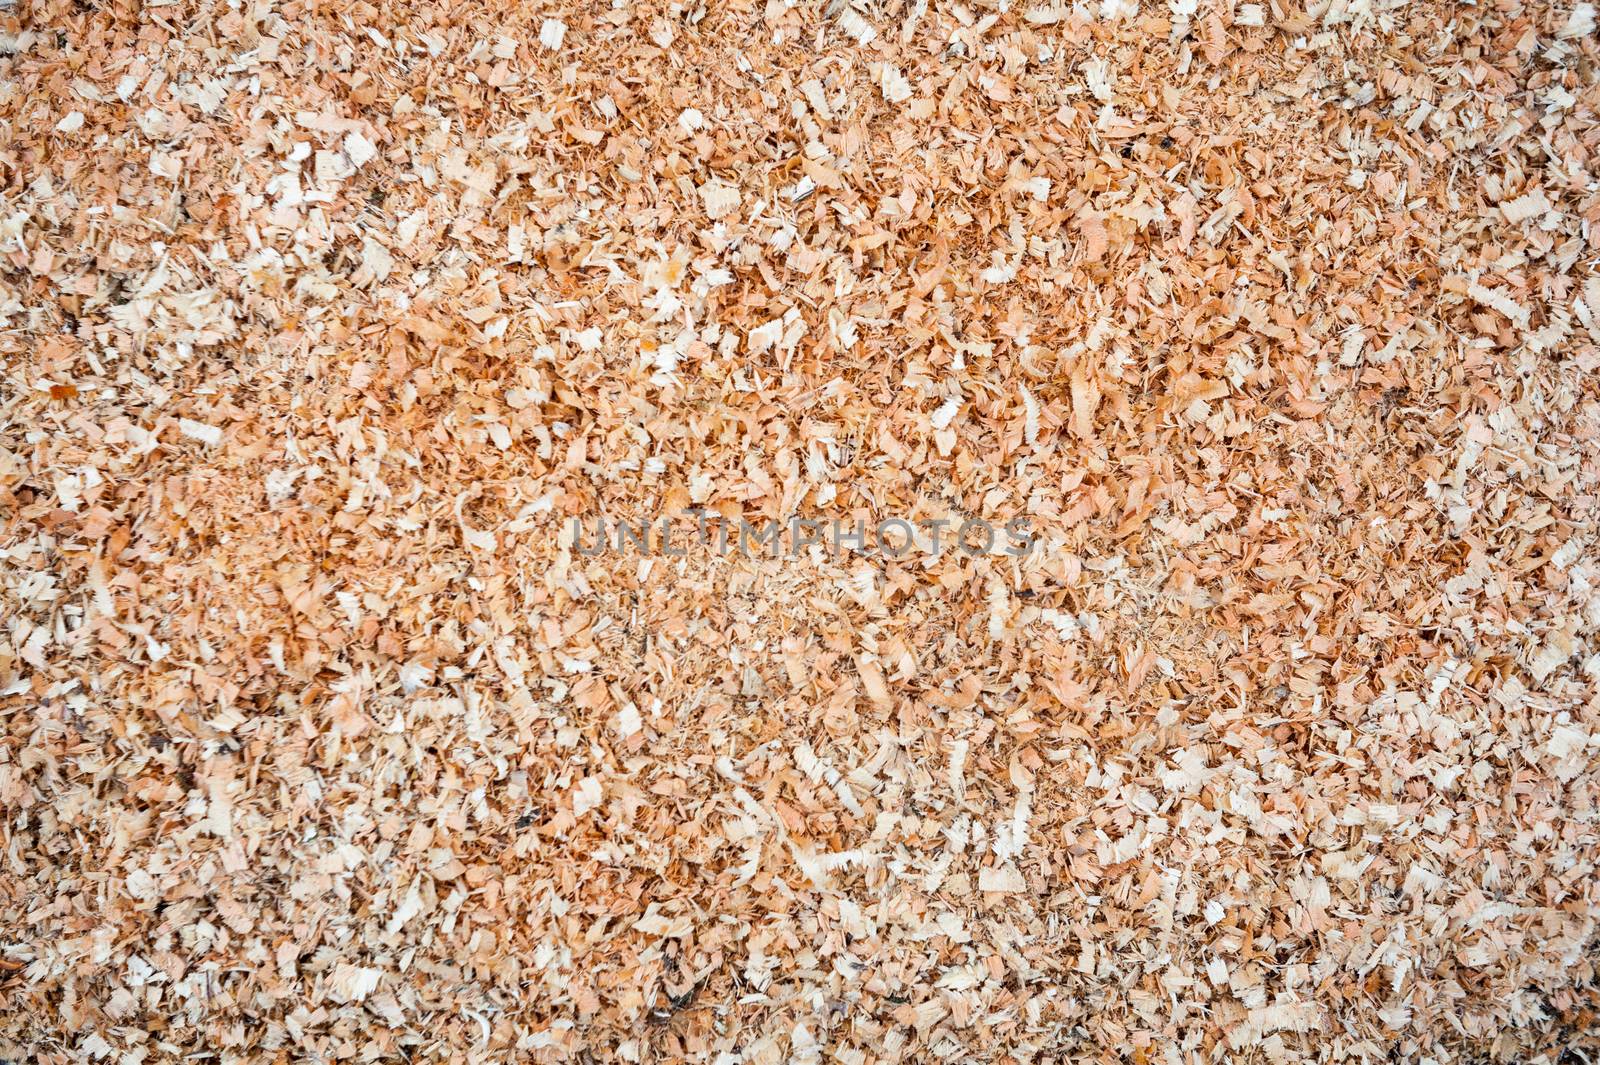 Wood sawdust by rootstocks